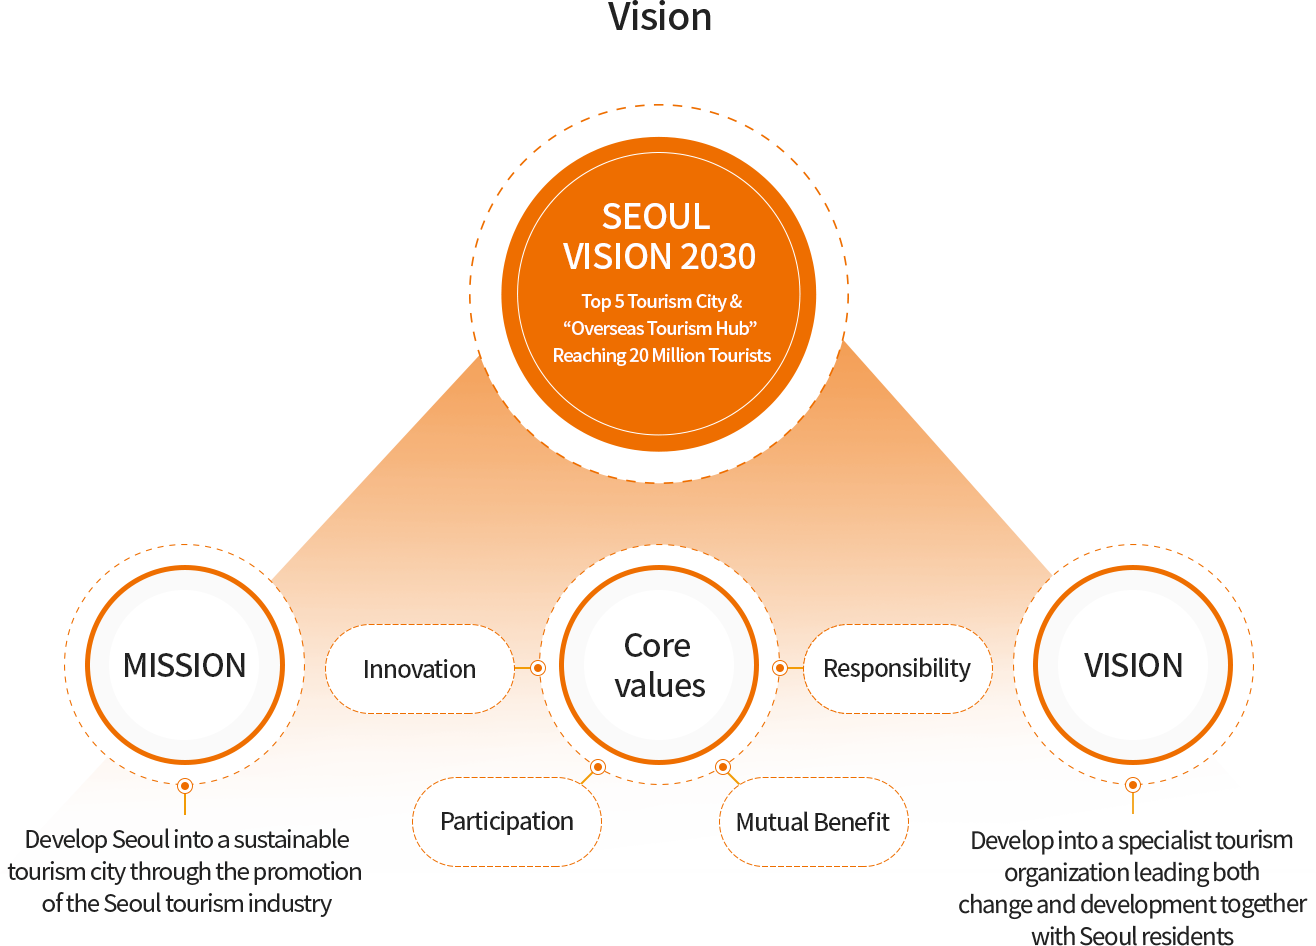 SEOUL VISION 2030:Top 5 Tourism City & 'Overseas Tourism Hub' Reaching 20Million Tourists / Core values:Innovation, Participation, Mutual Benefit, Responsibility / Mission:Develop Seoul into a sustainable tourism city through the promotion of the Seoul tourism industry / Vision:Develop into a specialist tourism organization leading both change and development together with Seoul residents